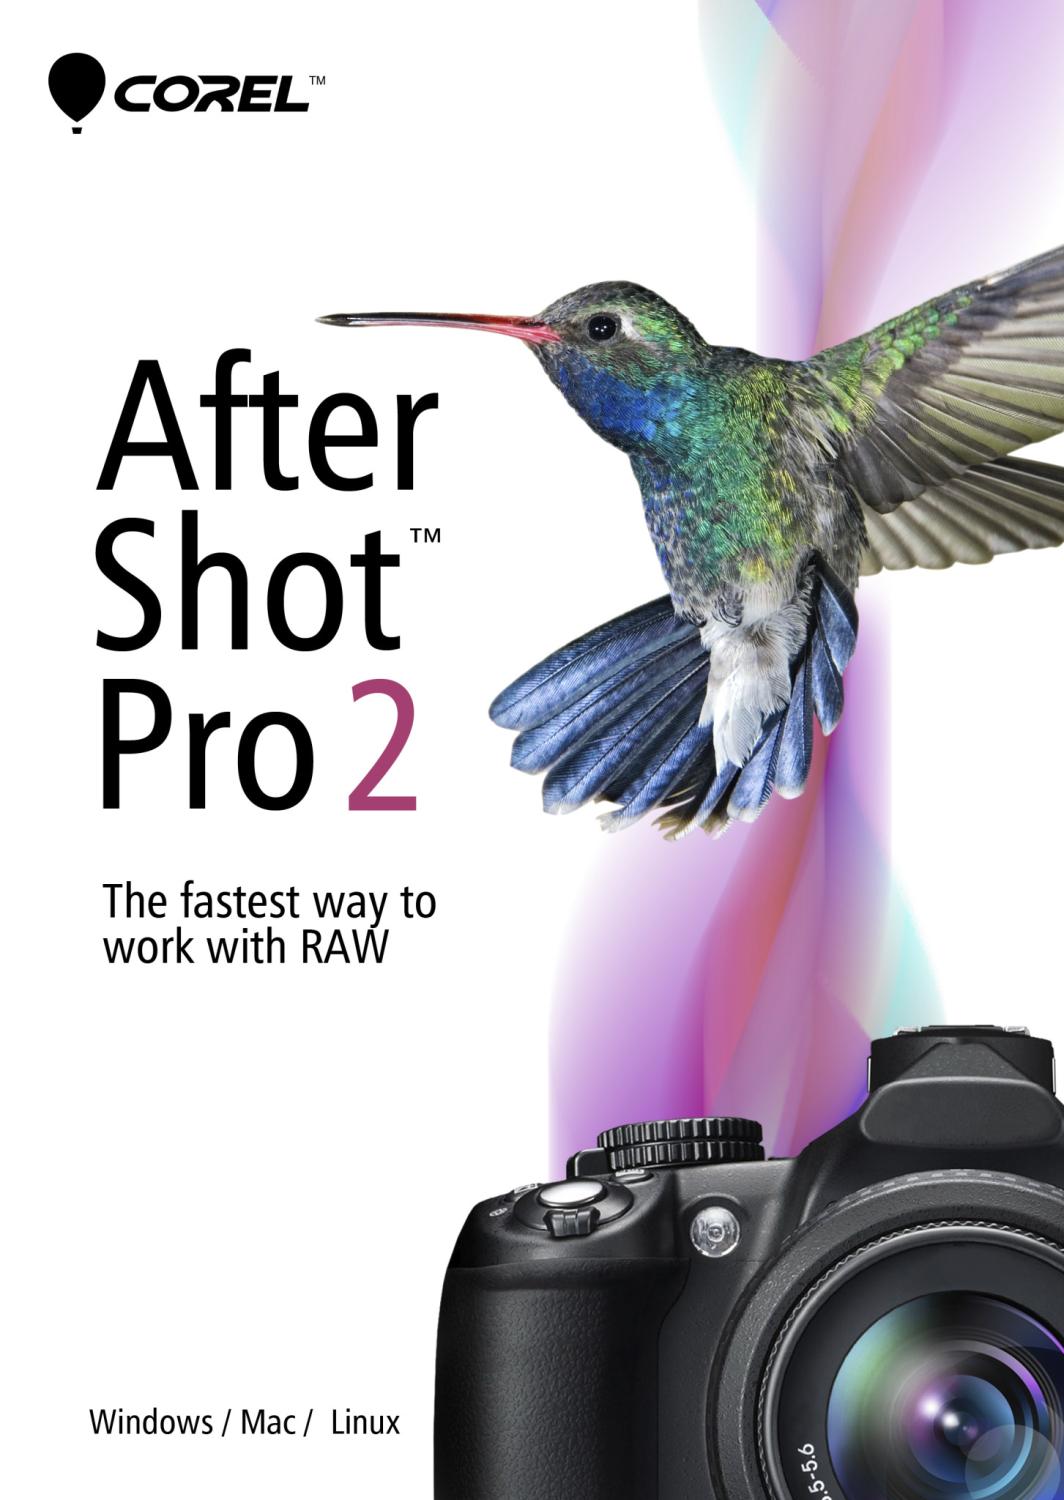 resize pictures for email with corel aftershot pro 2